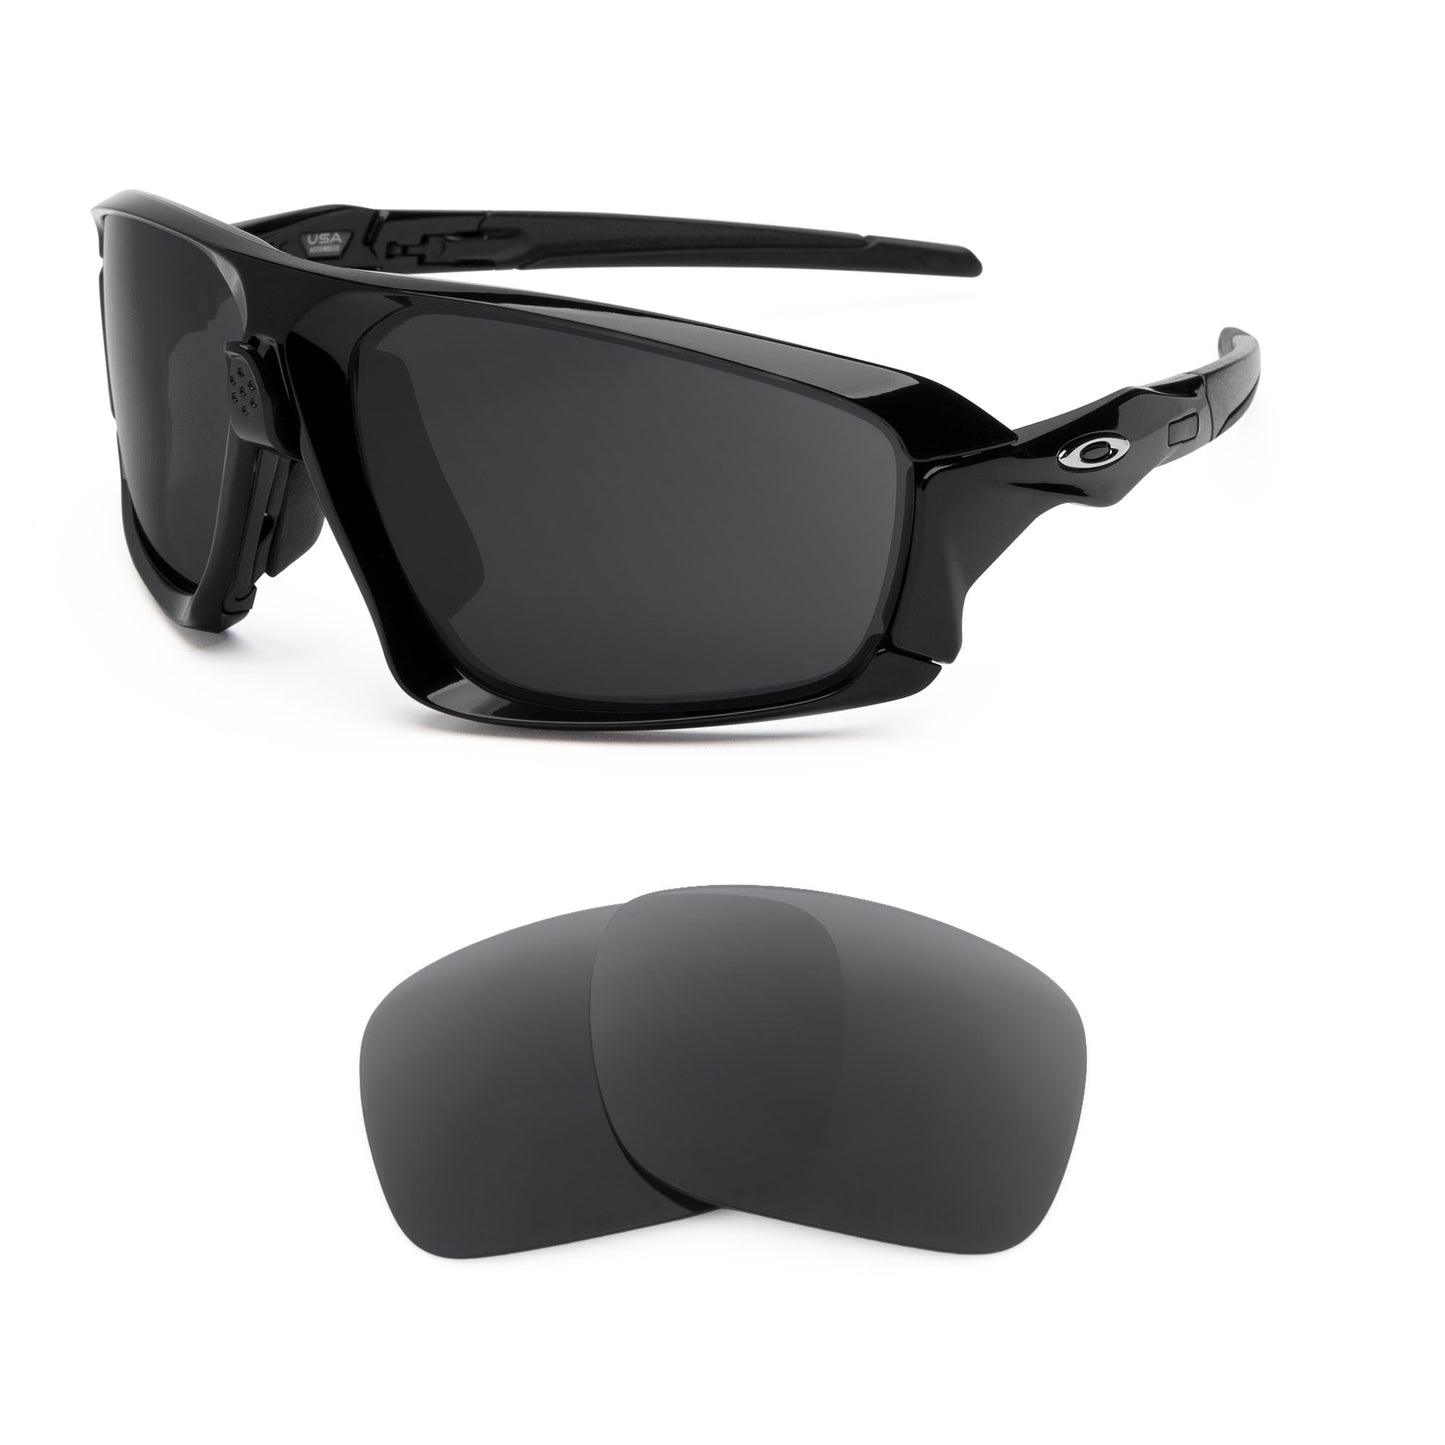 Oakley Field Jacket sunglasses with replacement lenses